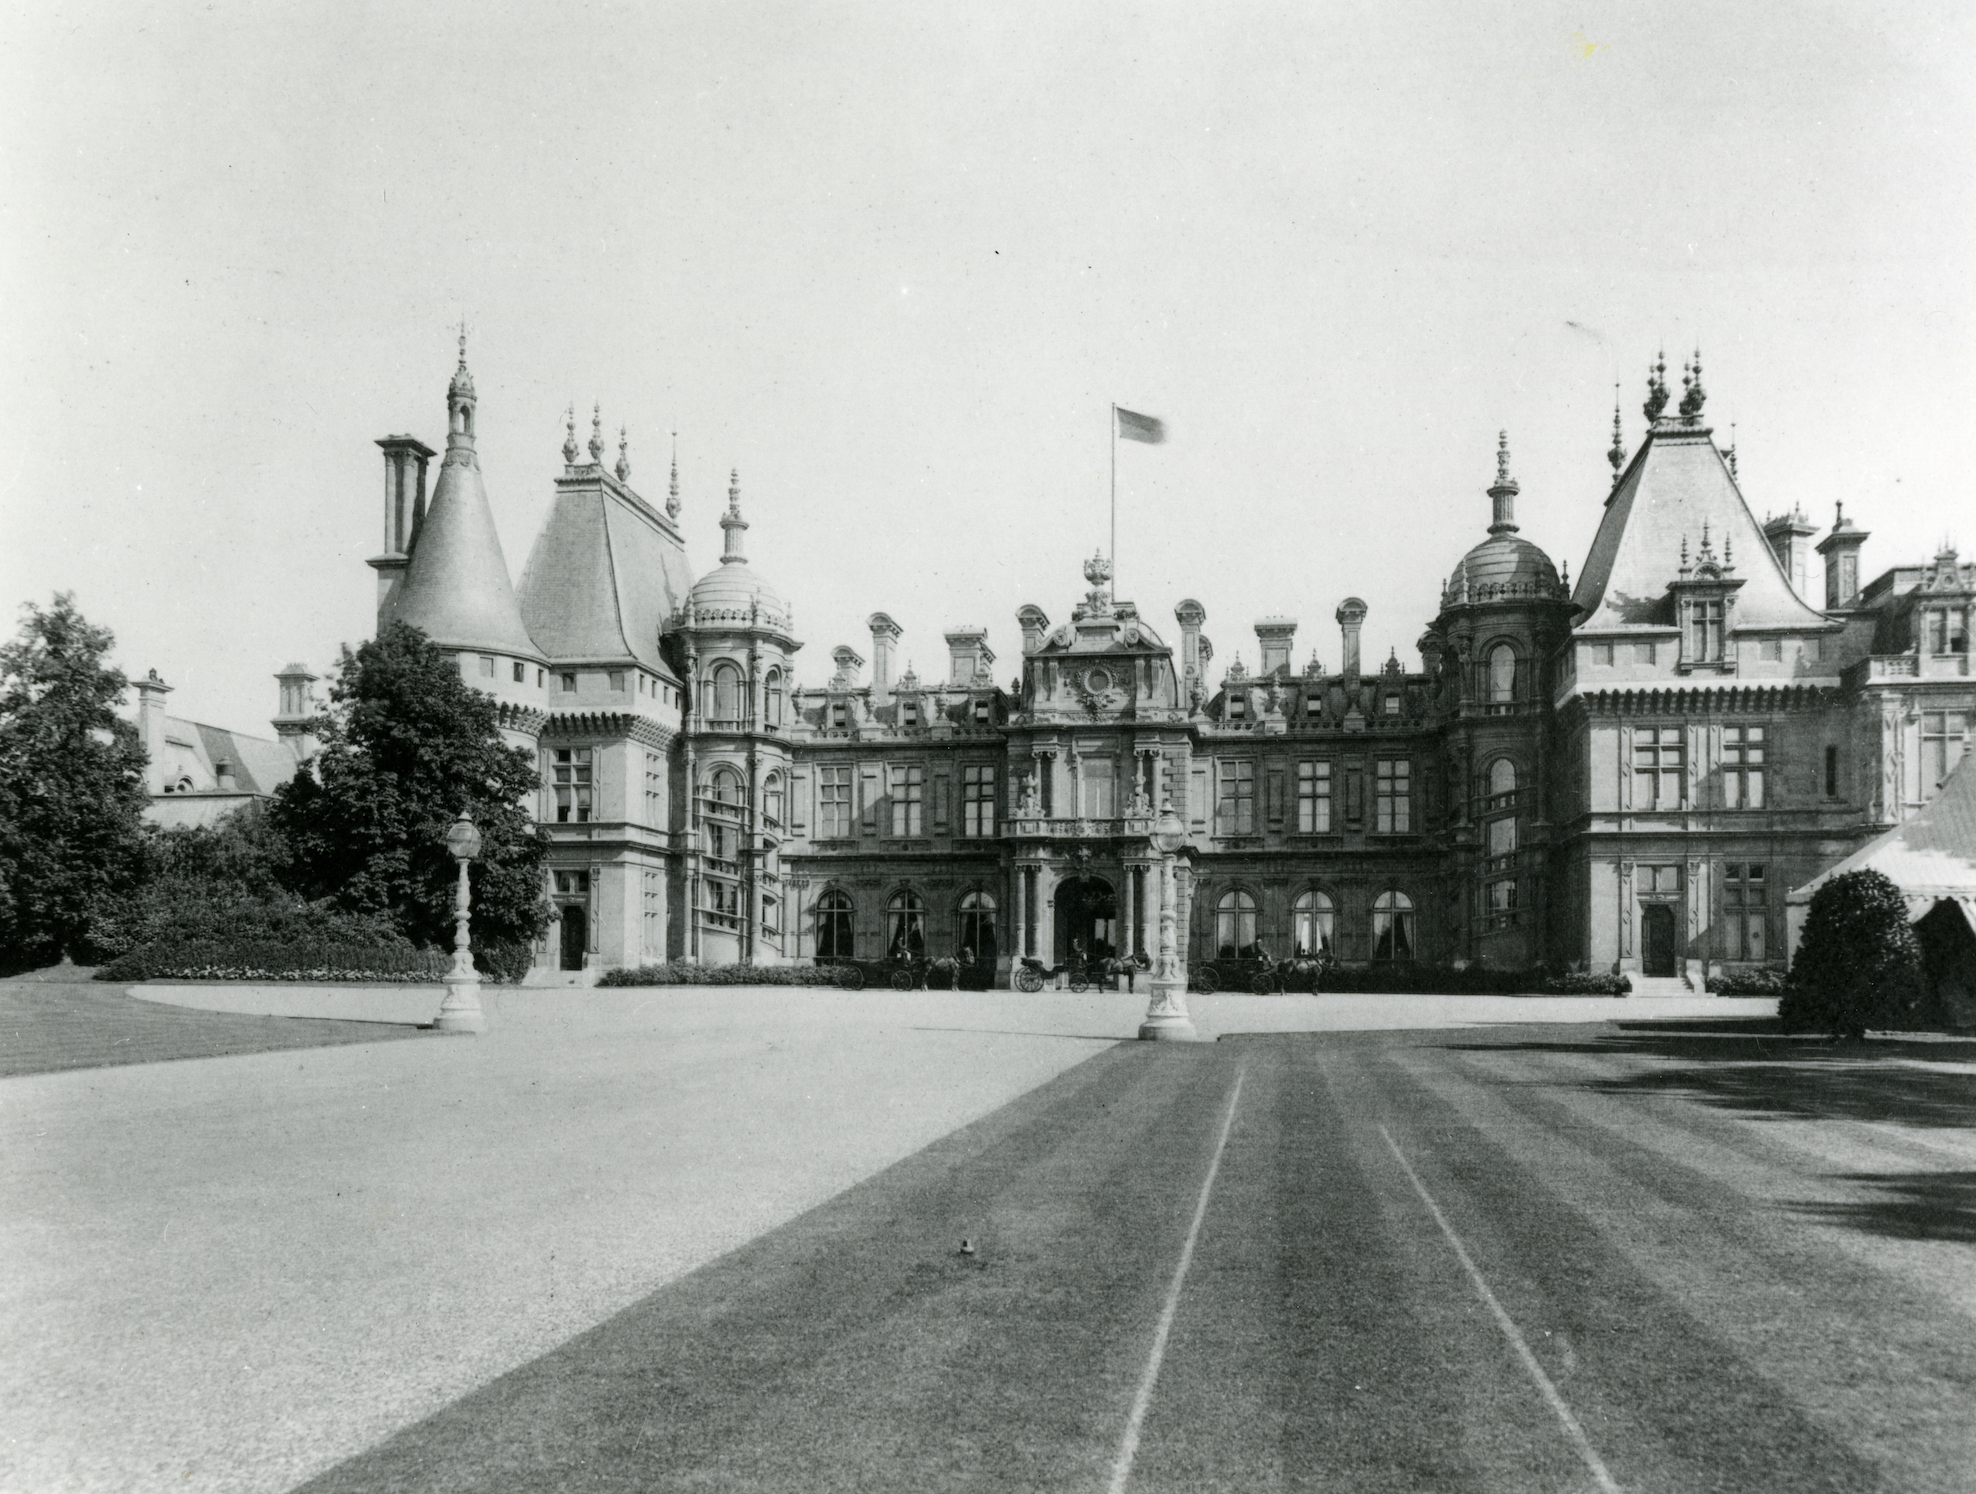 View of the North Front, Waddesdon Manor, 1897. Waddesdon Manor (acc. no. 54).